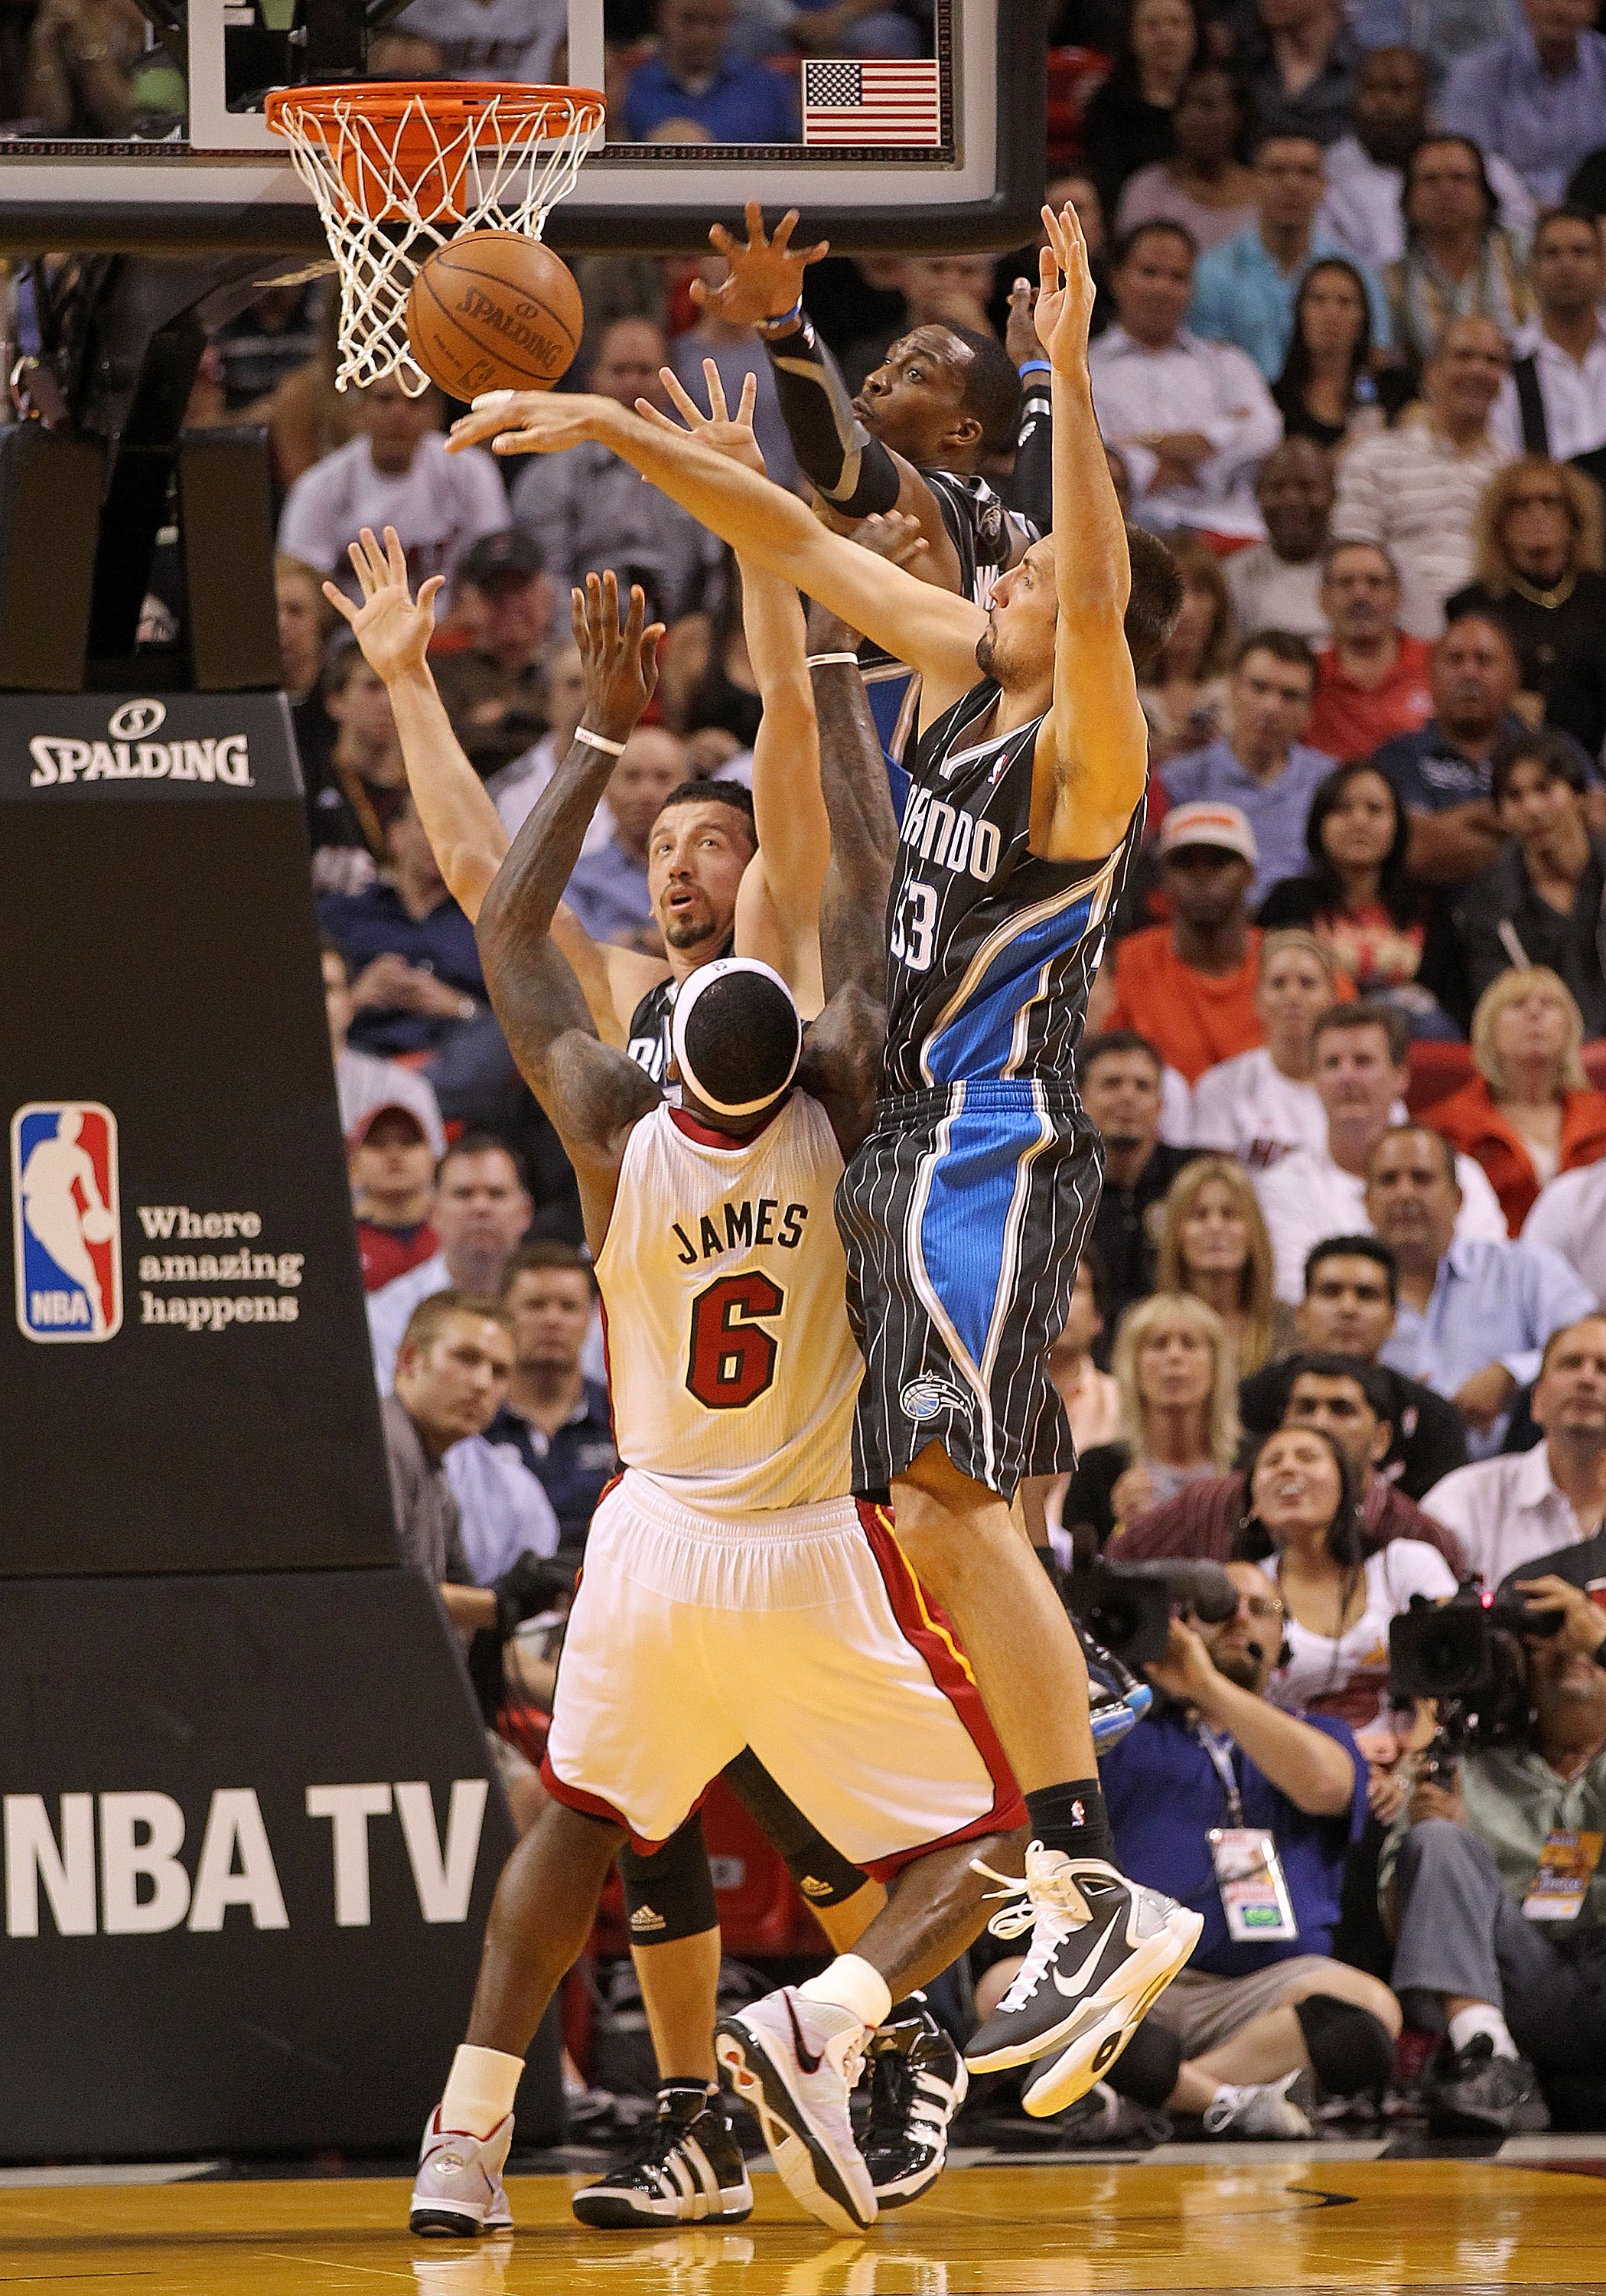 MIAMI, FL - MARCH 03:  LeBron James #6 of the Miami Heat shoots over Hedo Turkoglu #15, Ryan Anderson #33, and Dwight Howard #12 of the Orlando Magic during a game at American Airlines Arena on March 3, 2011 in Miami, Florida. NOTE TO USER: User expressly